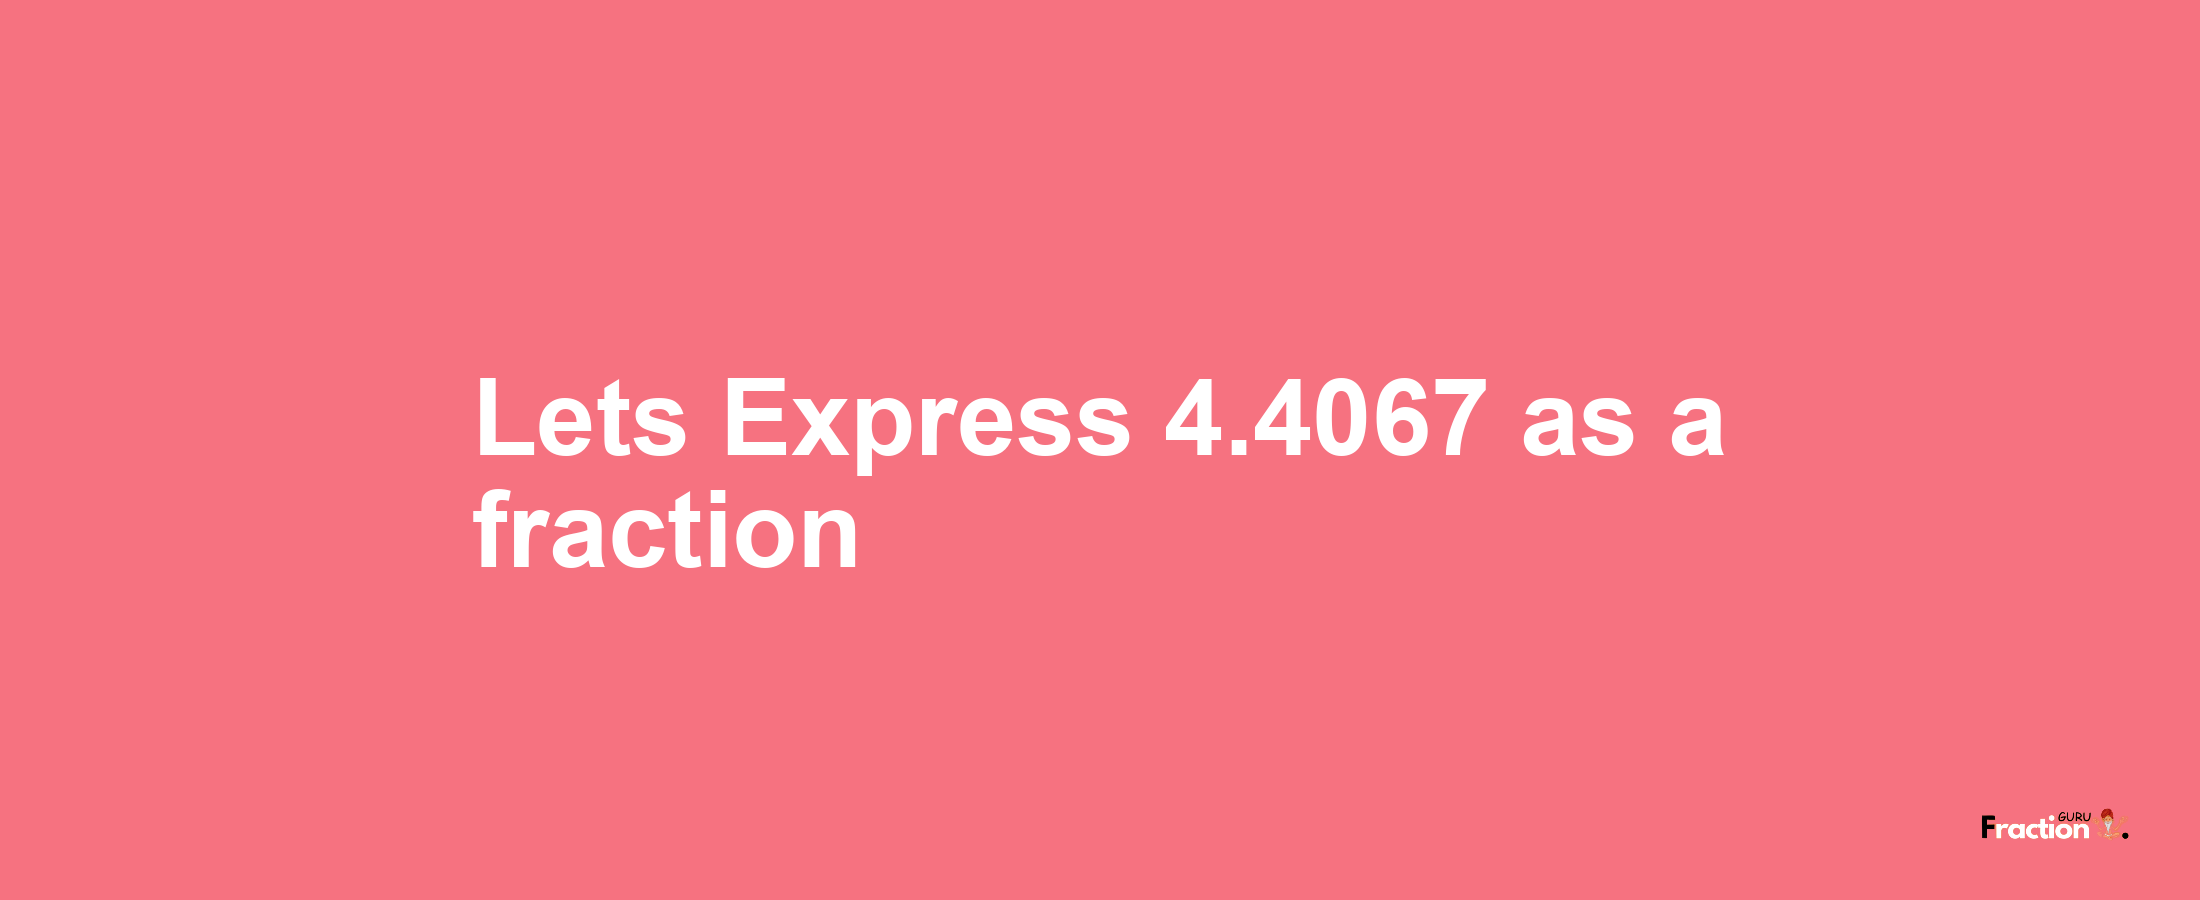 Lets Express 4.4067 as afraction